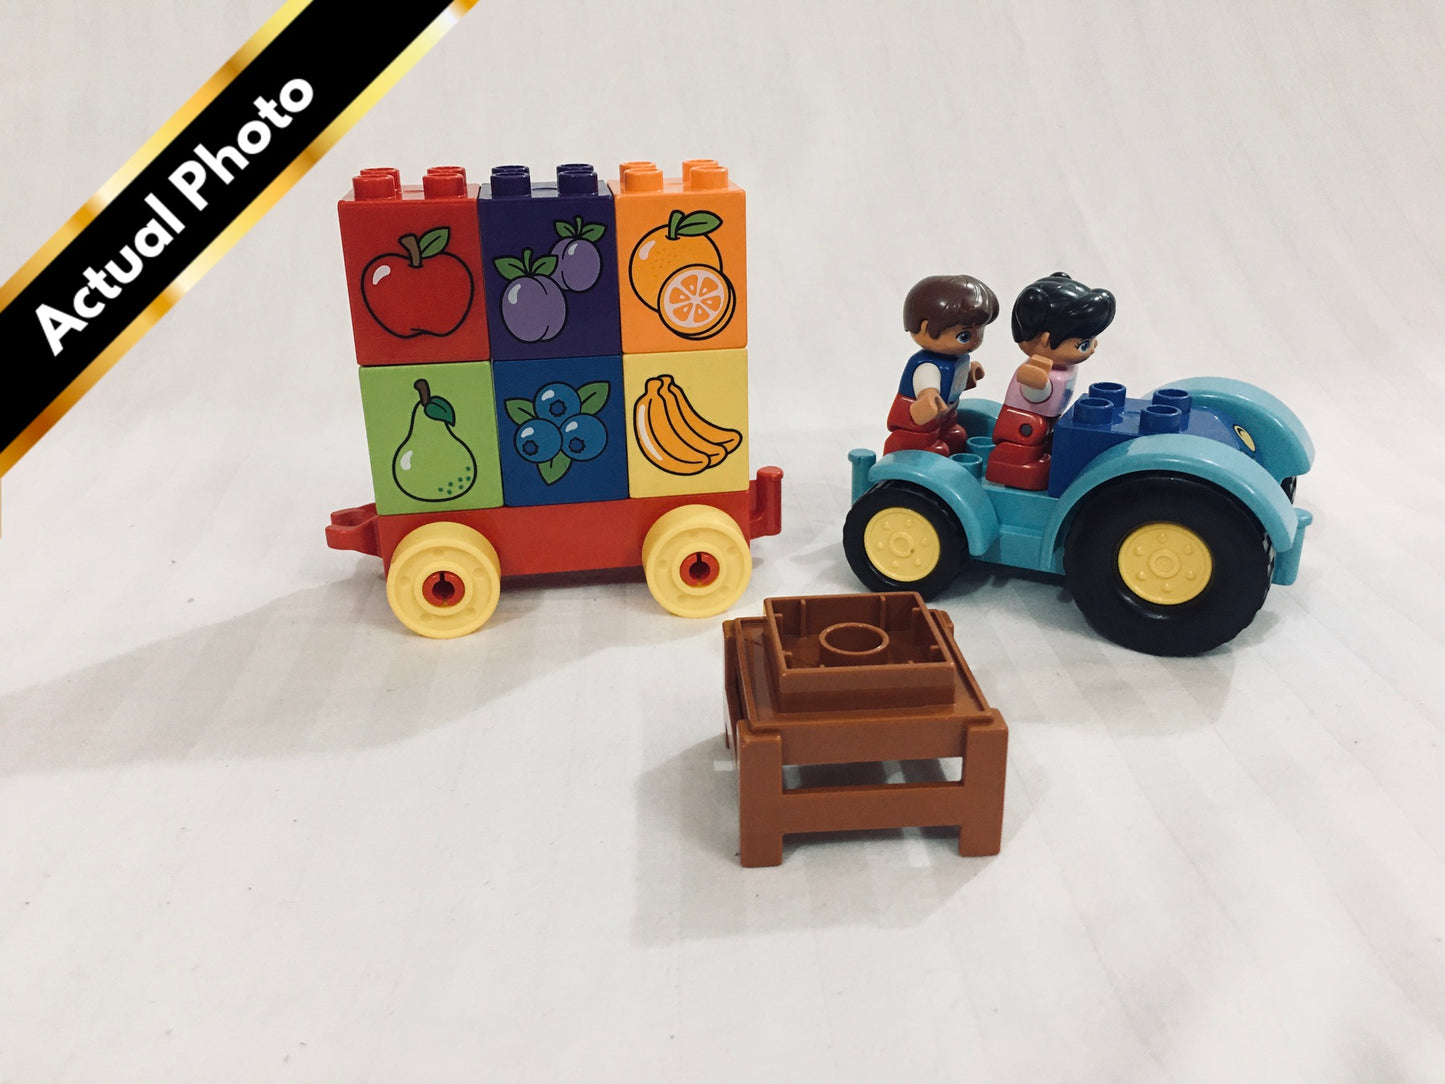 Lego My First Tractor [Gently used] [#463]